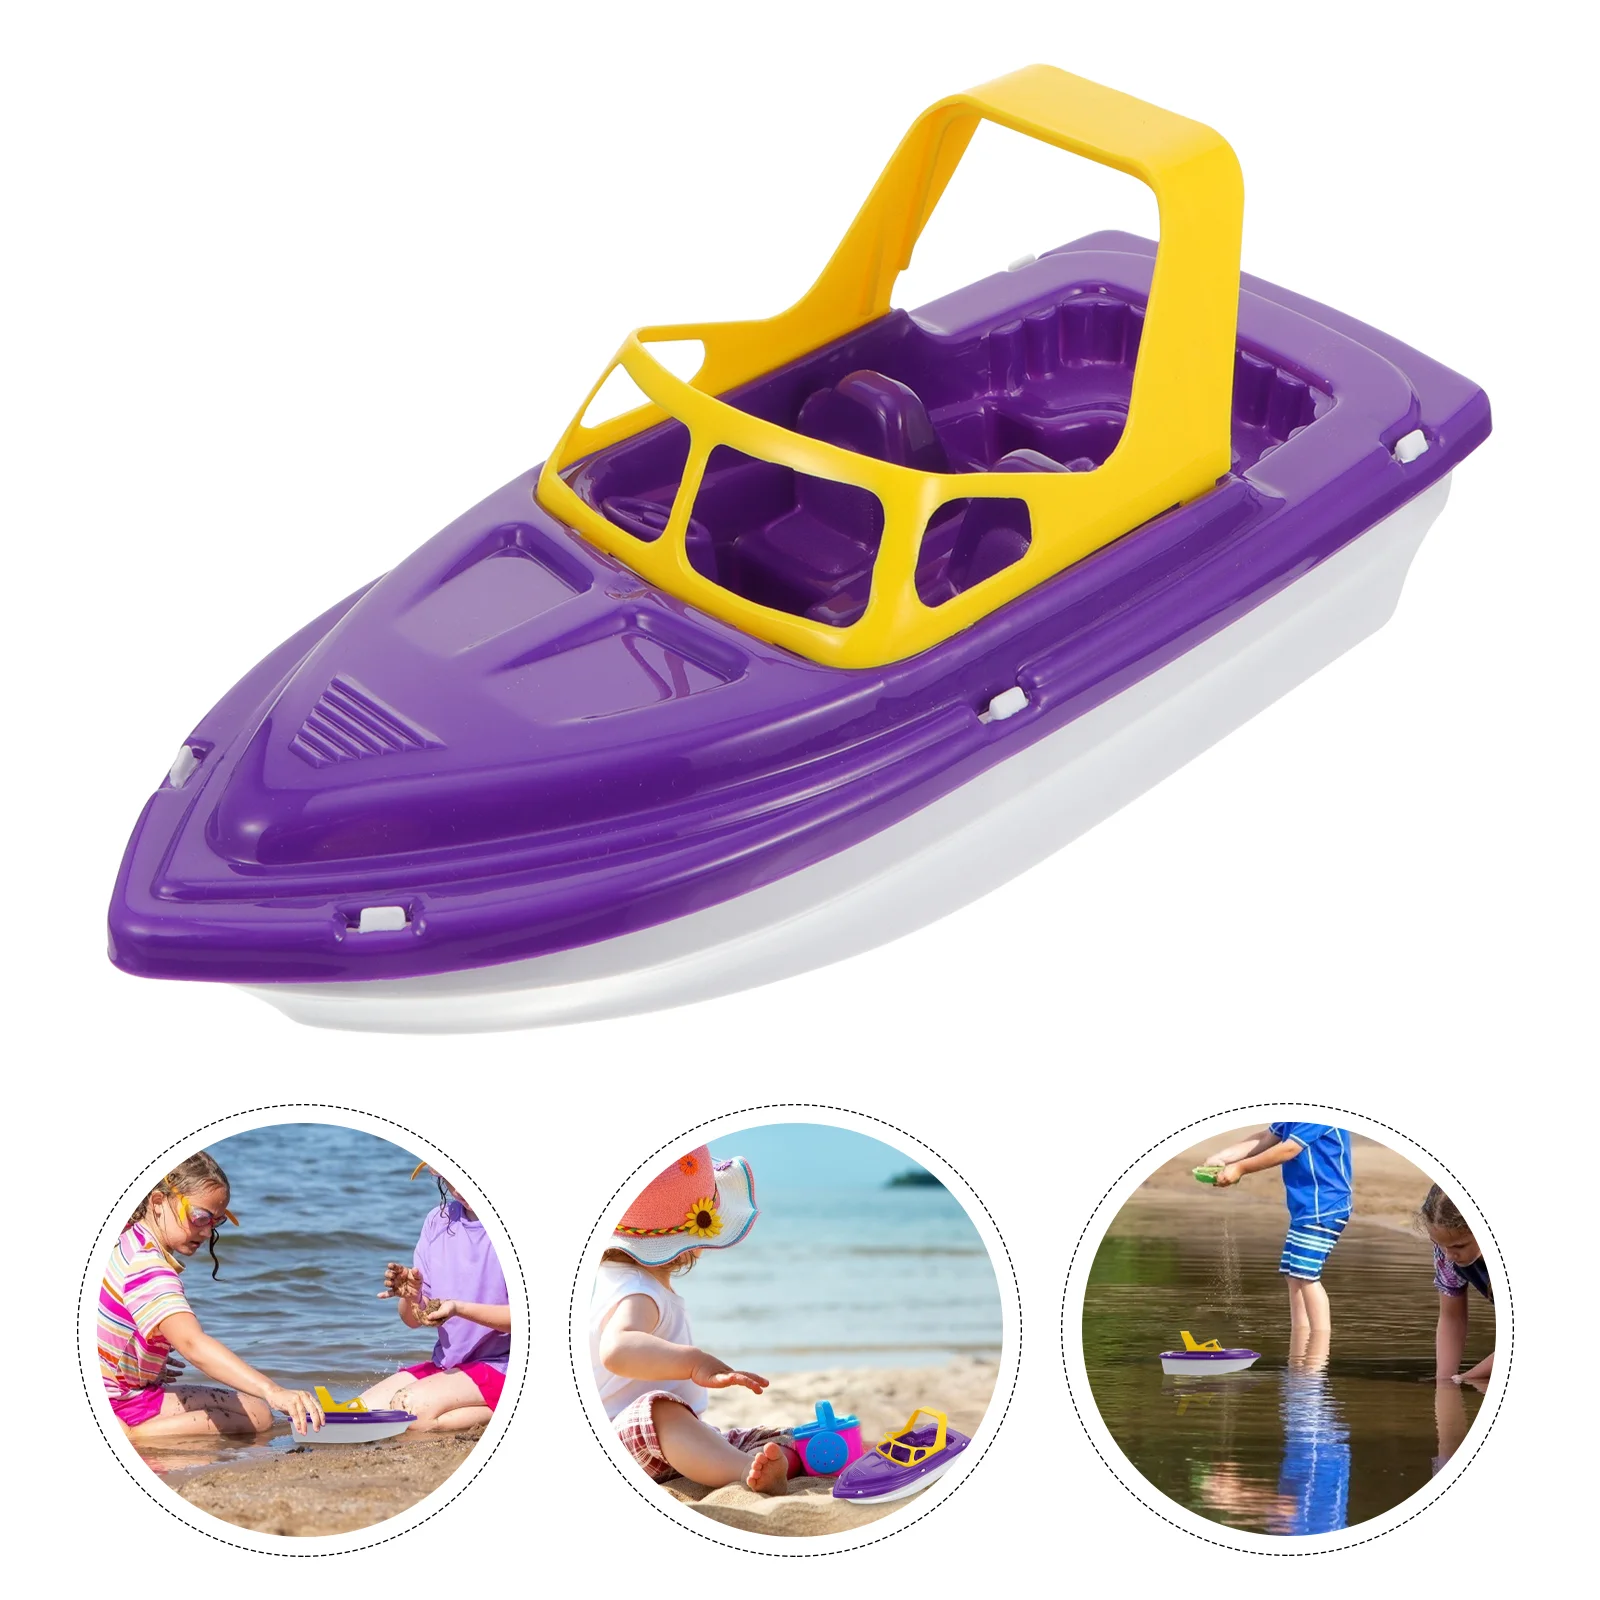 

Bath Pool Sailing Beach Sand Toys for Toddlers Pools Bathtub Party Favors